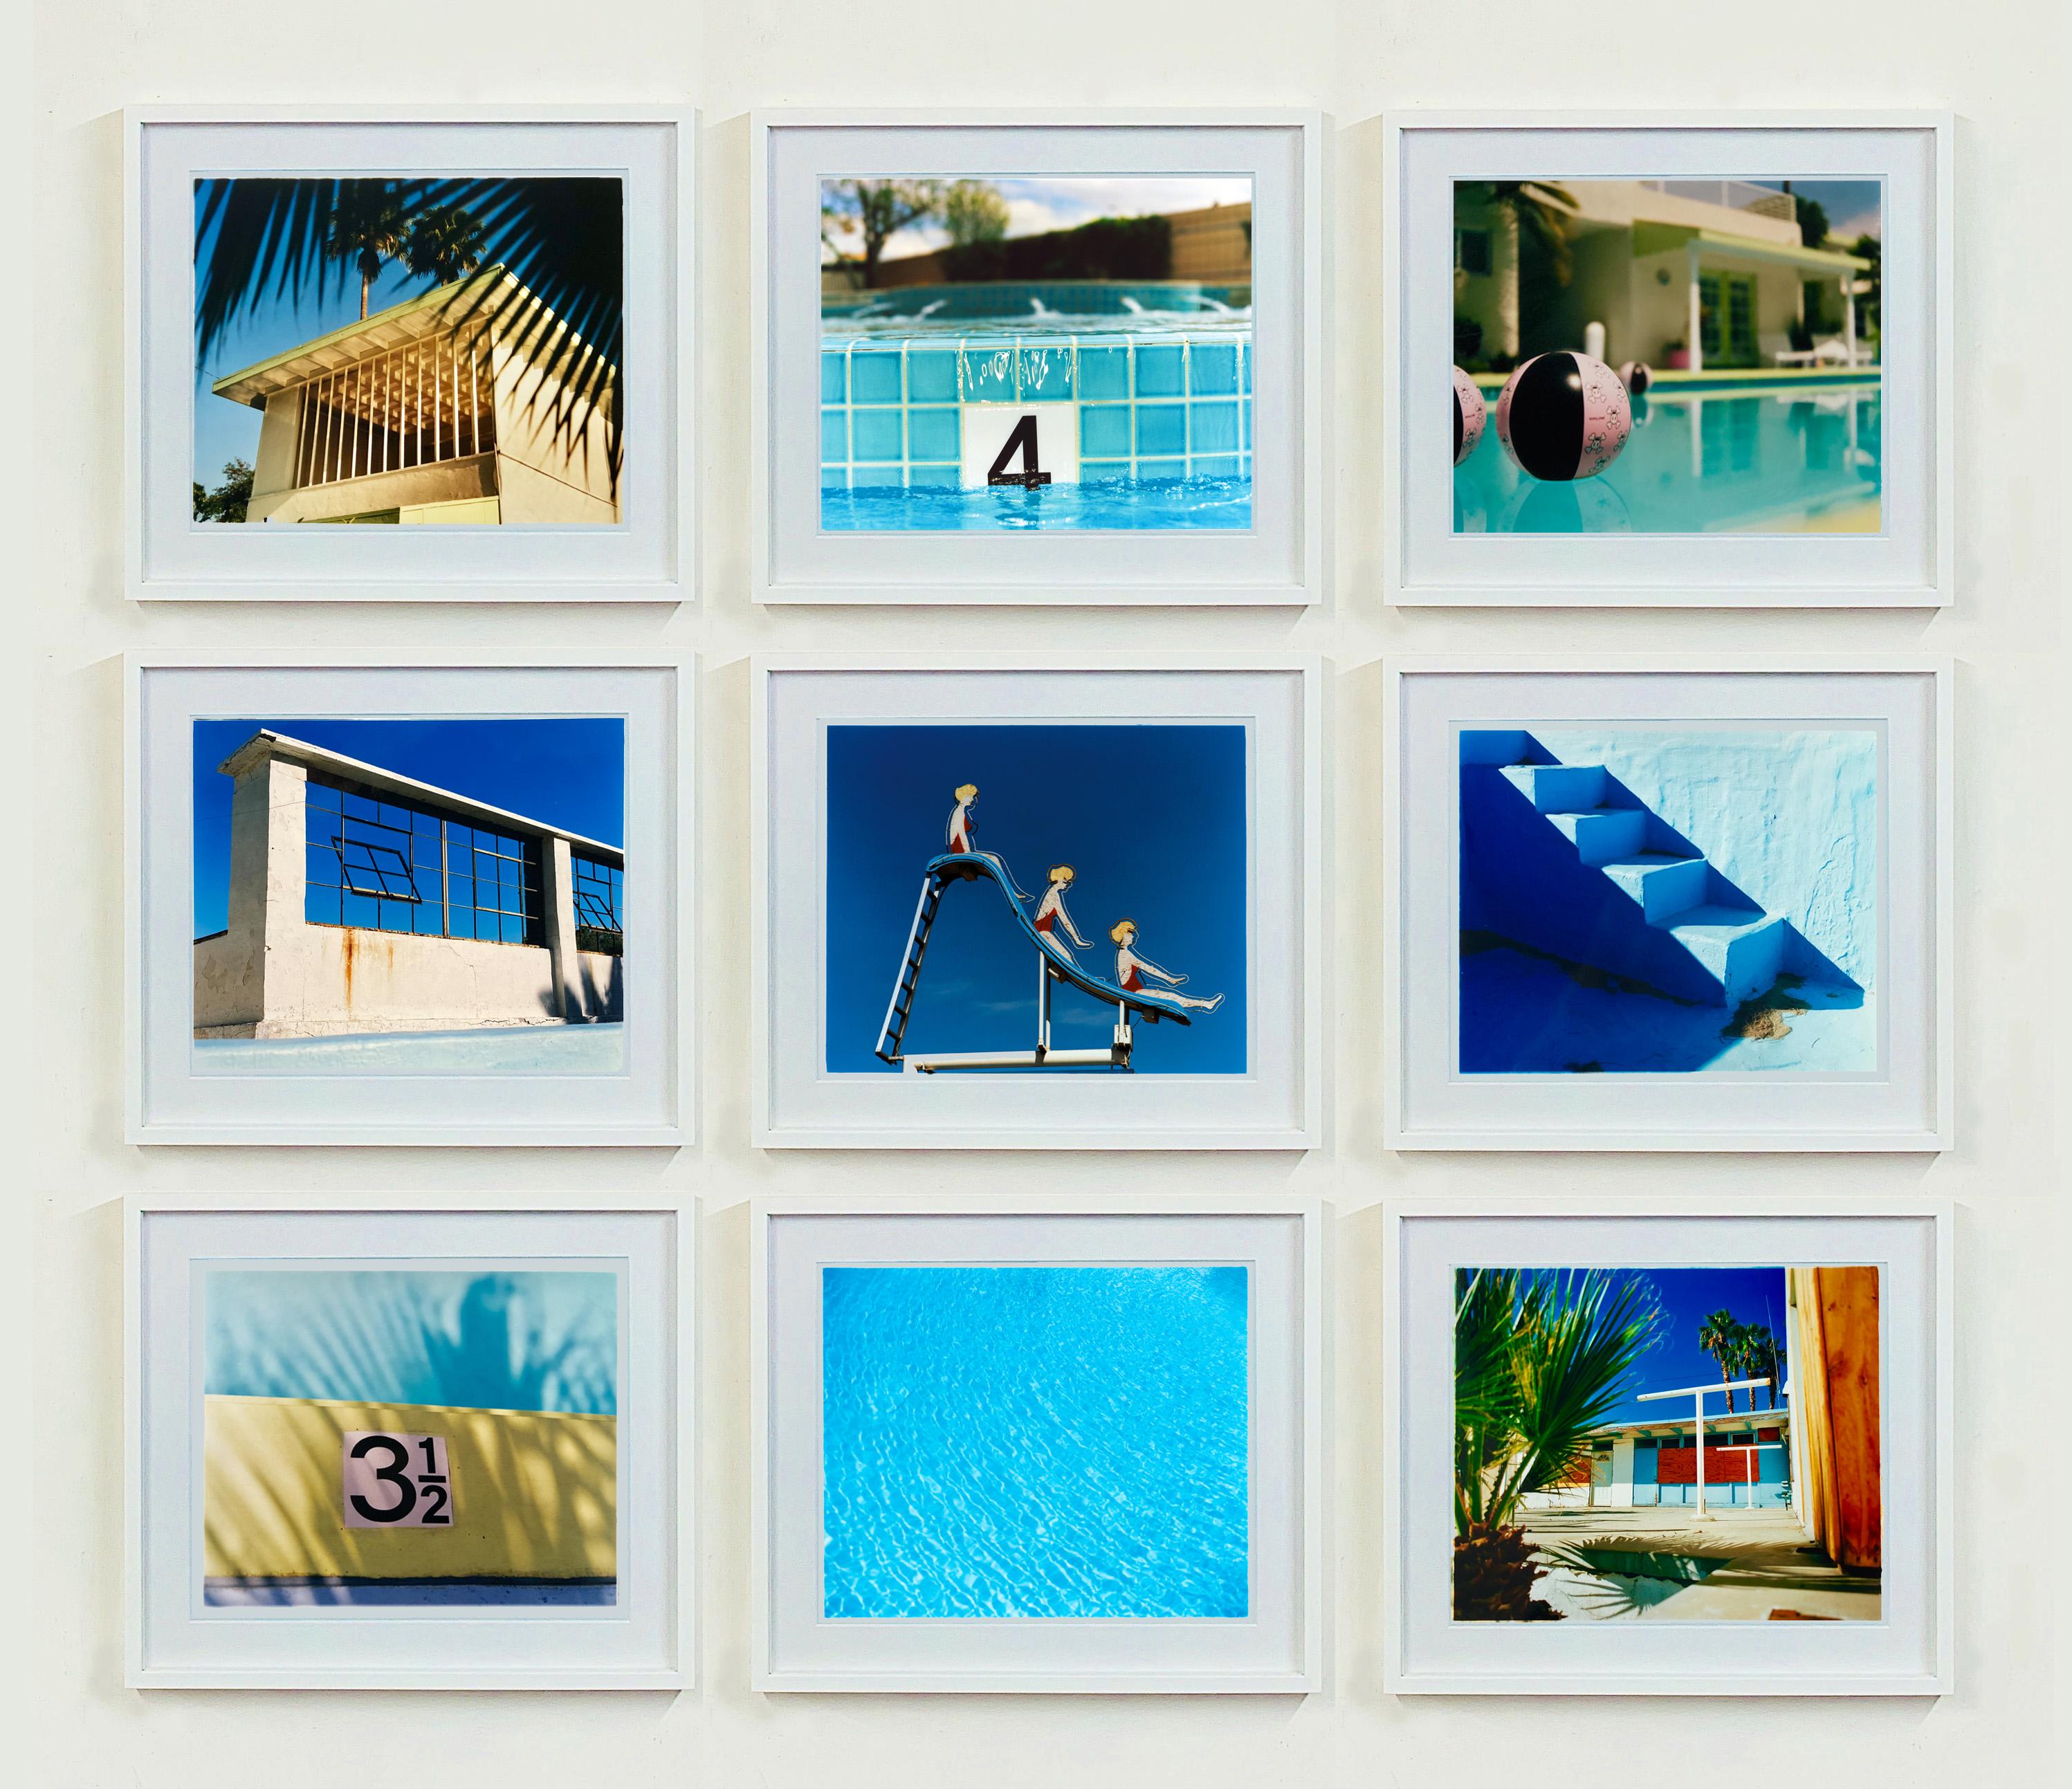 Richard Heeps Dream in Color 'Pool Installation'.
A set of nine individual artworks, vibrant yet serene they take you on a journey through California & Nevada through the eyes of the photographer Richard Heeps. 

This installation comprises of nine